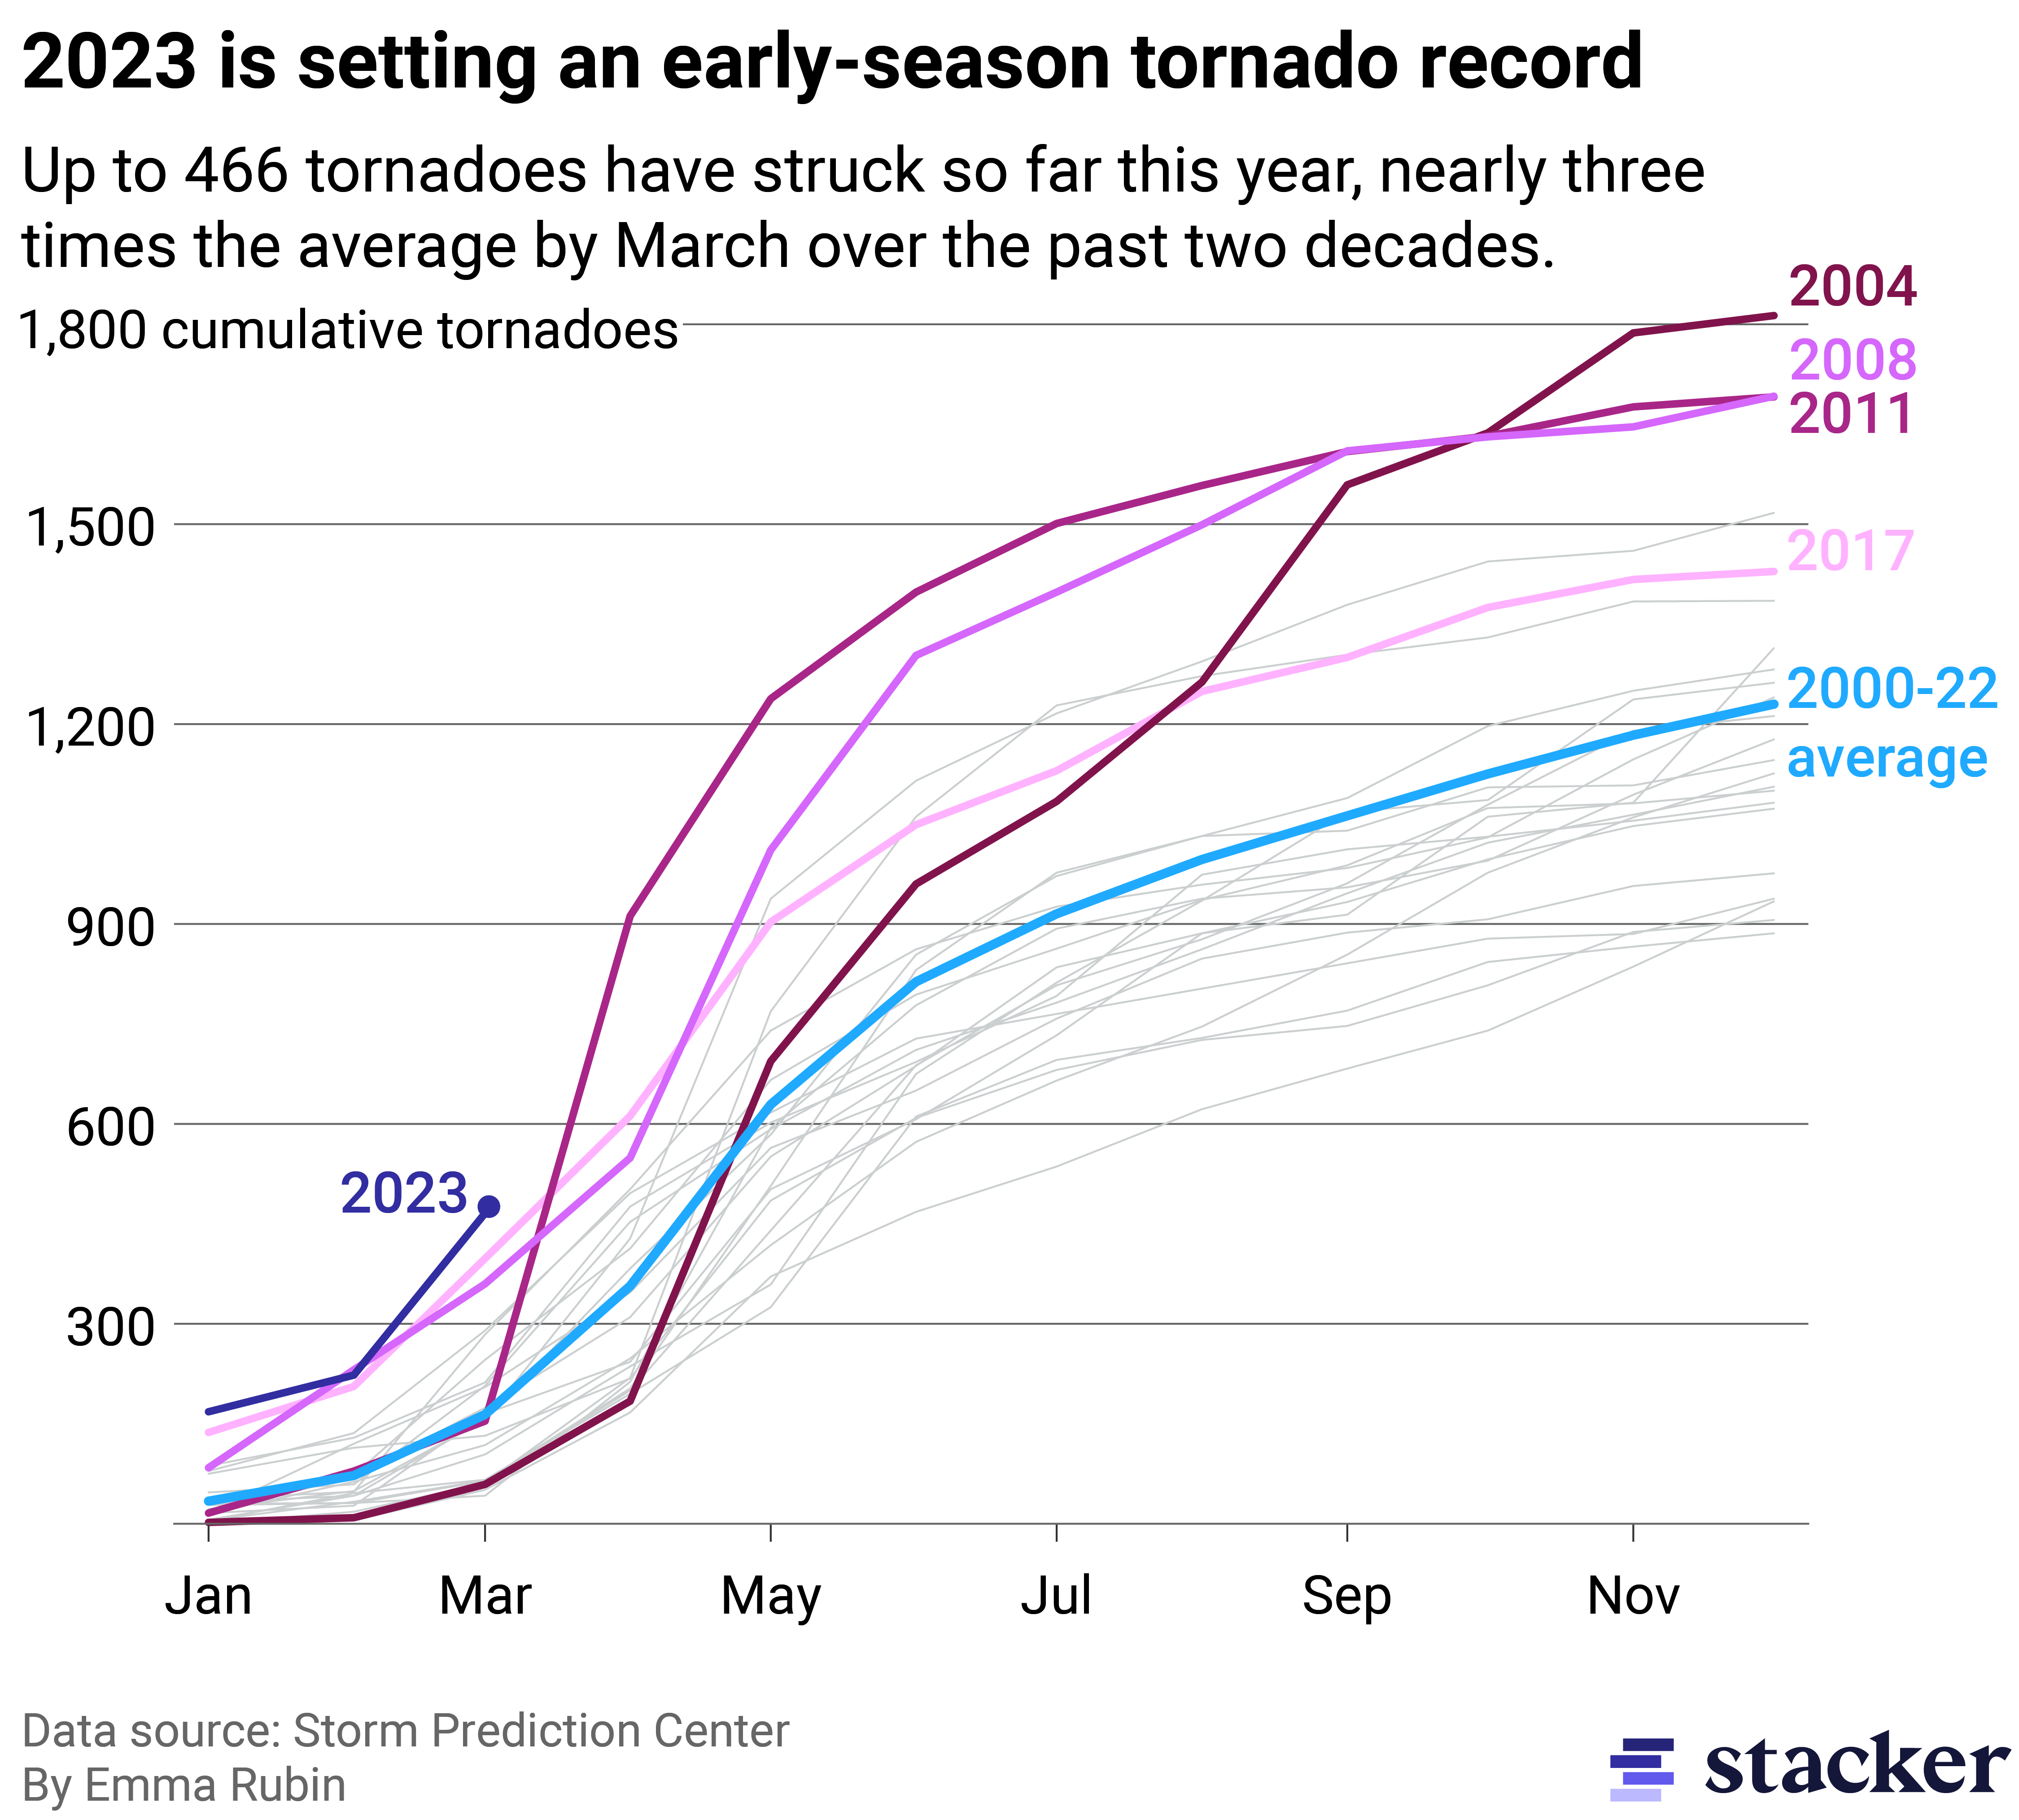 Line graph showing the number of tornadoes in various years. The start of 2023 is shown as setting a record for number of tornadoes in first 3 months of the year. 